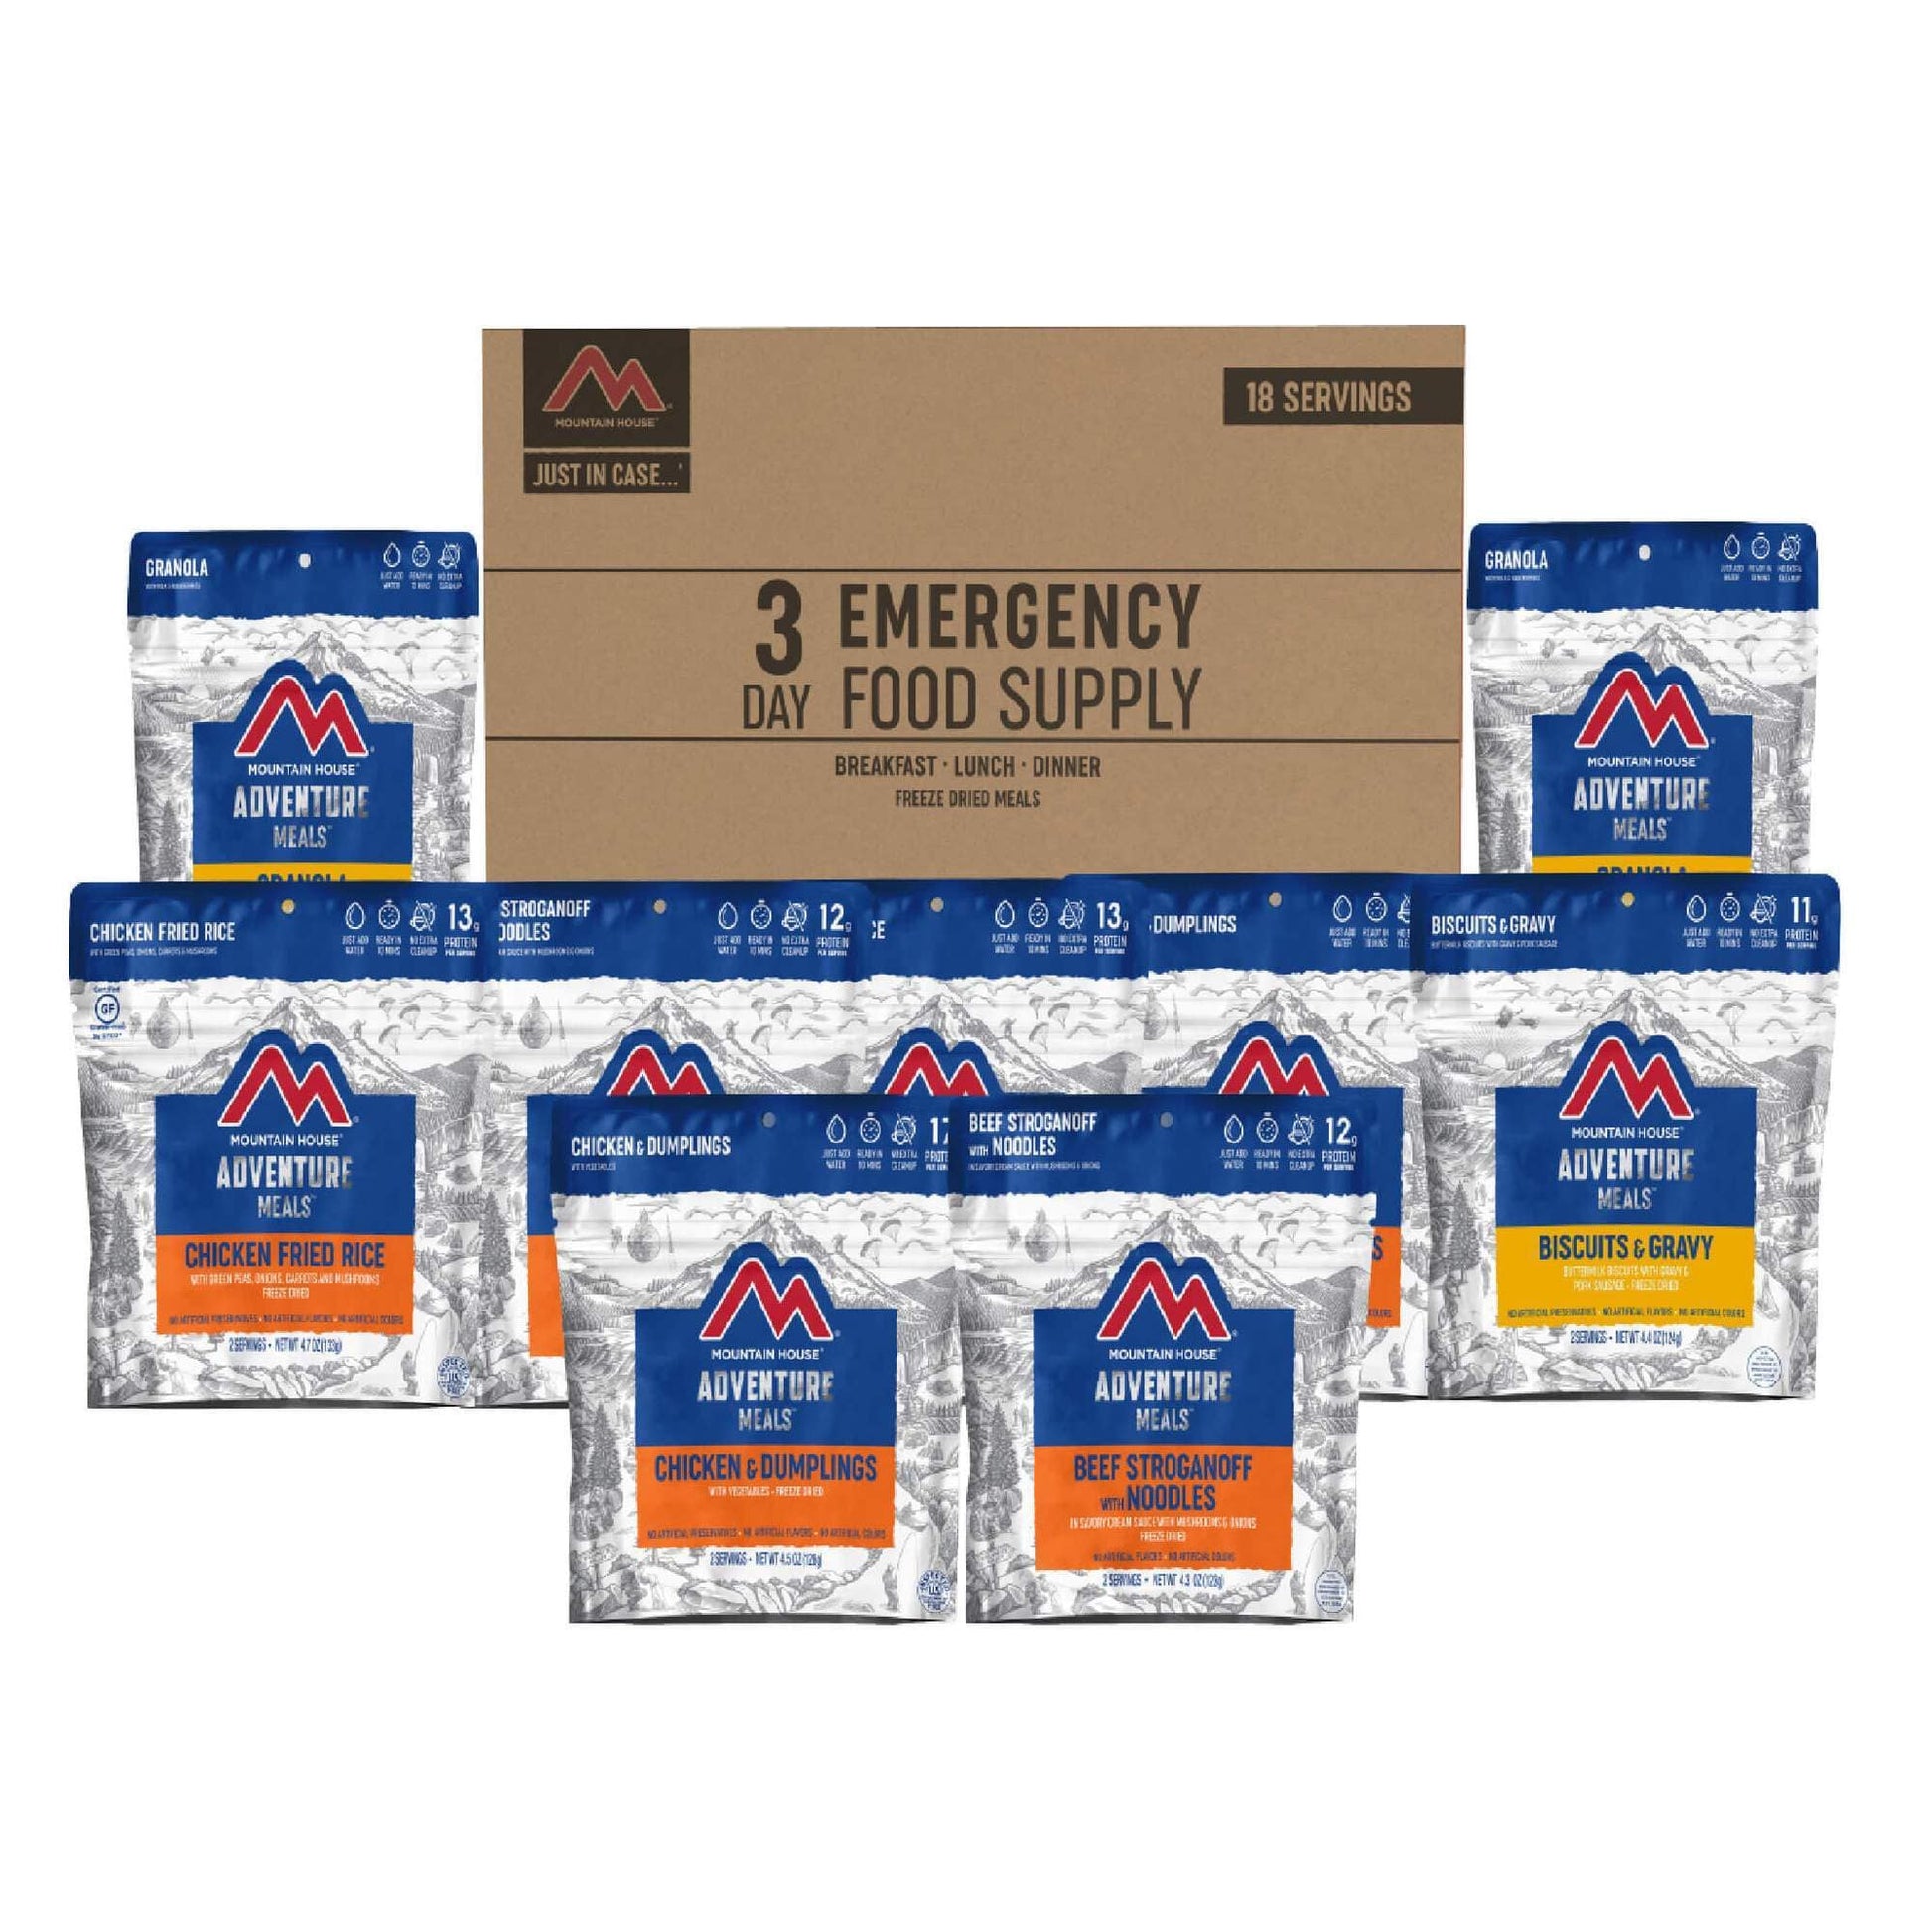 Just in Case...® 3 Day Emergency Food Supply Kit